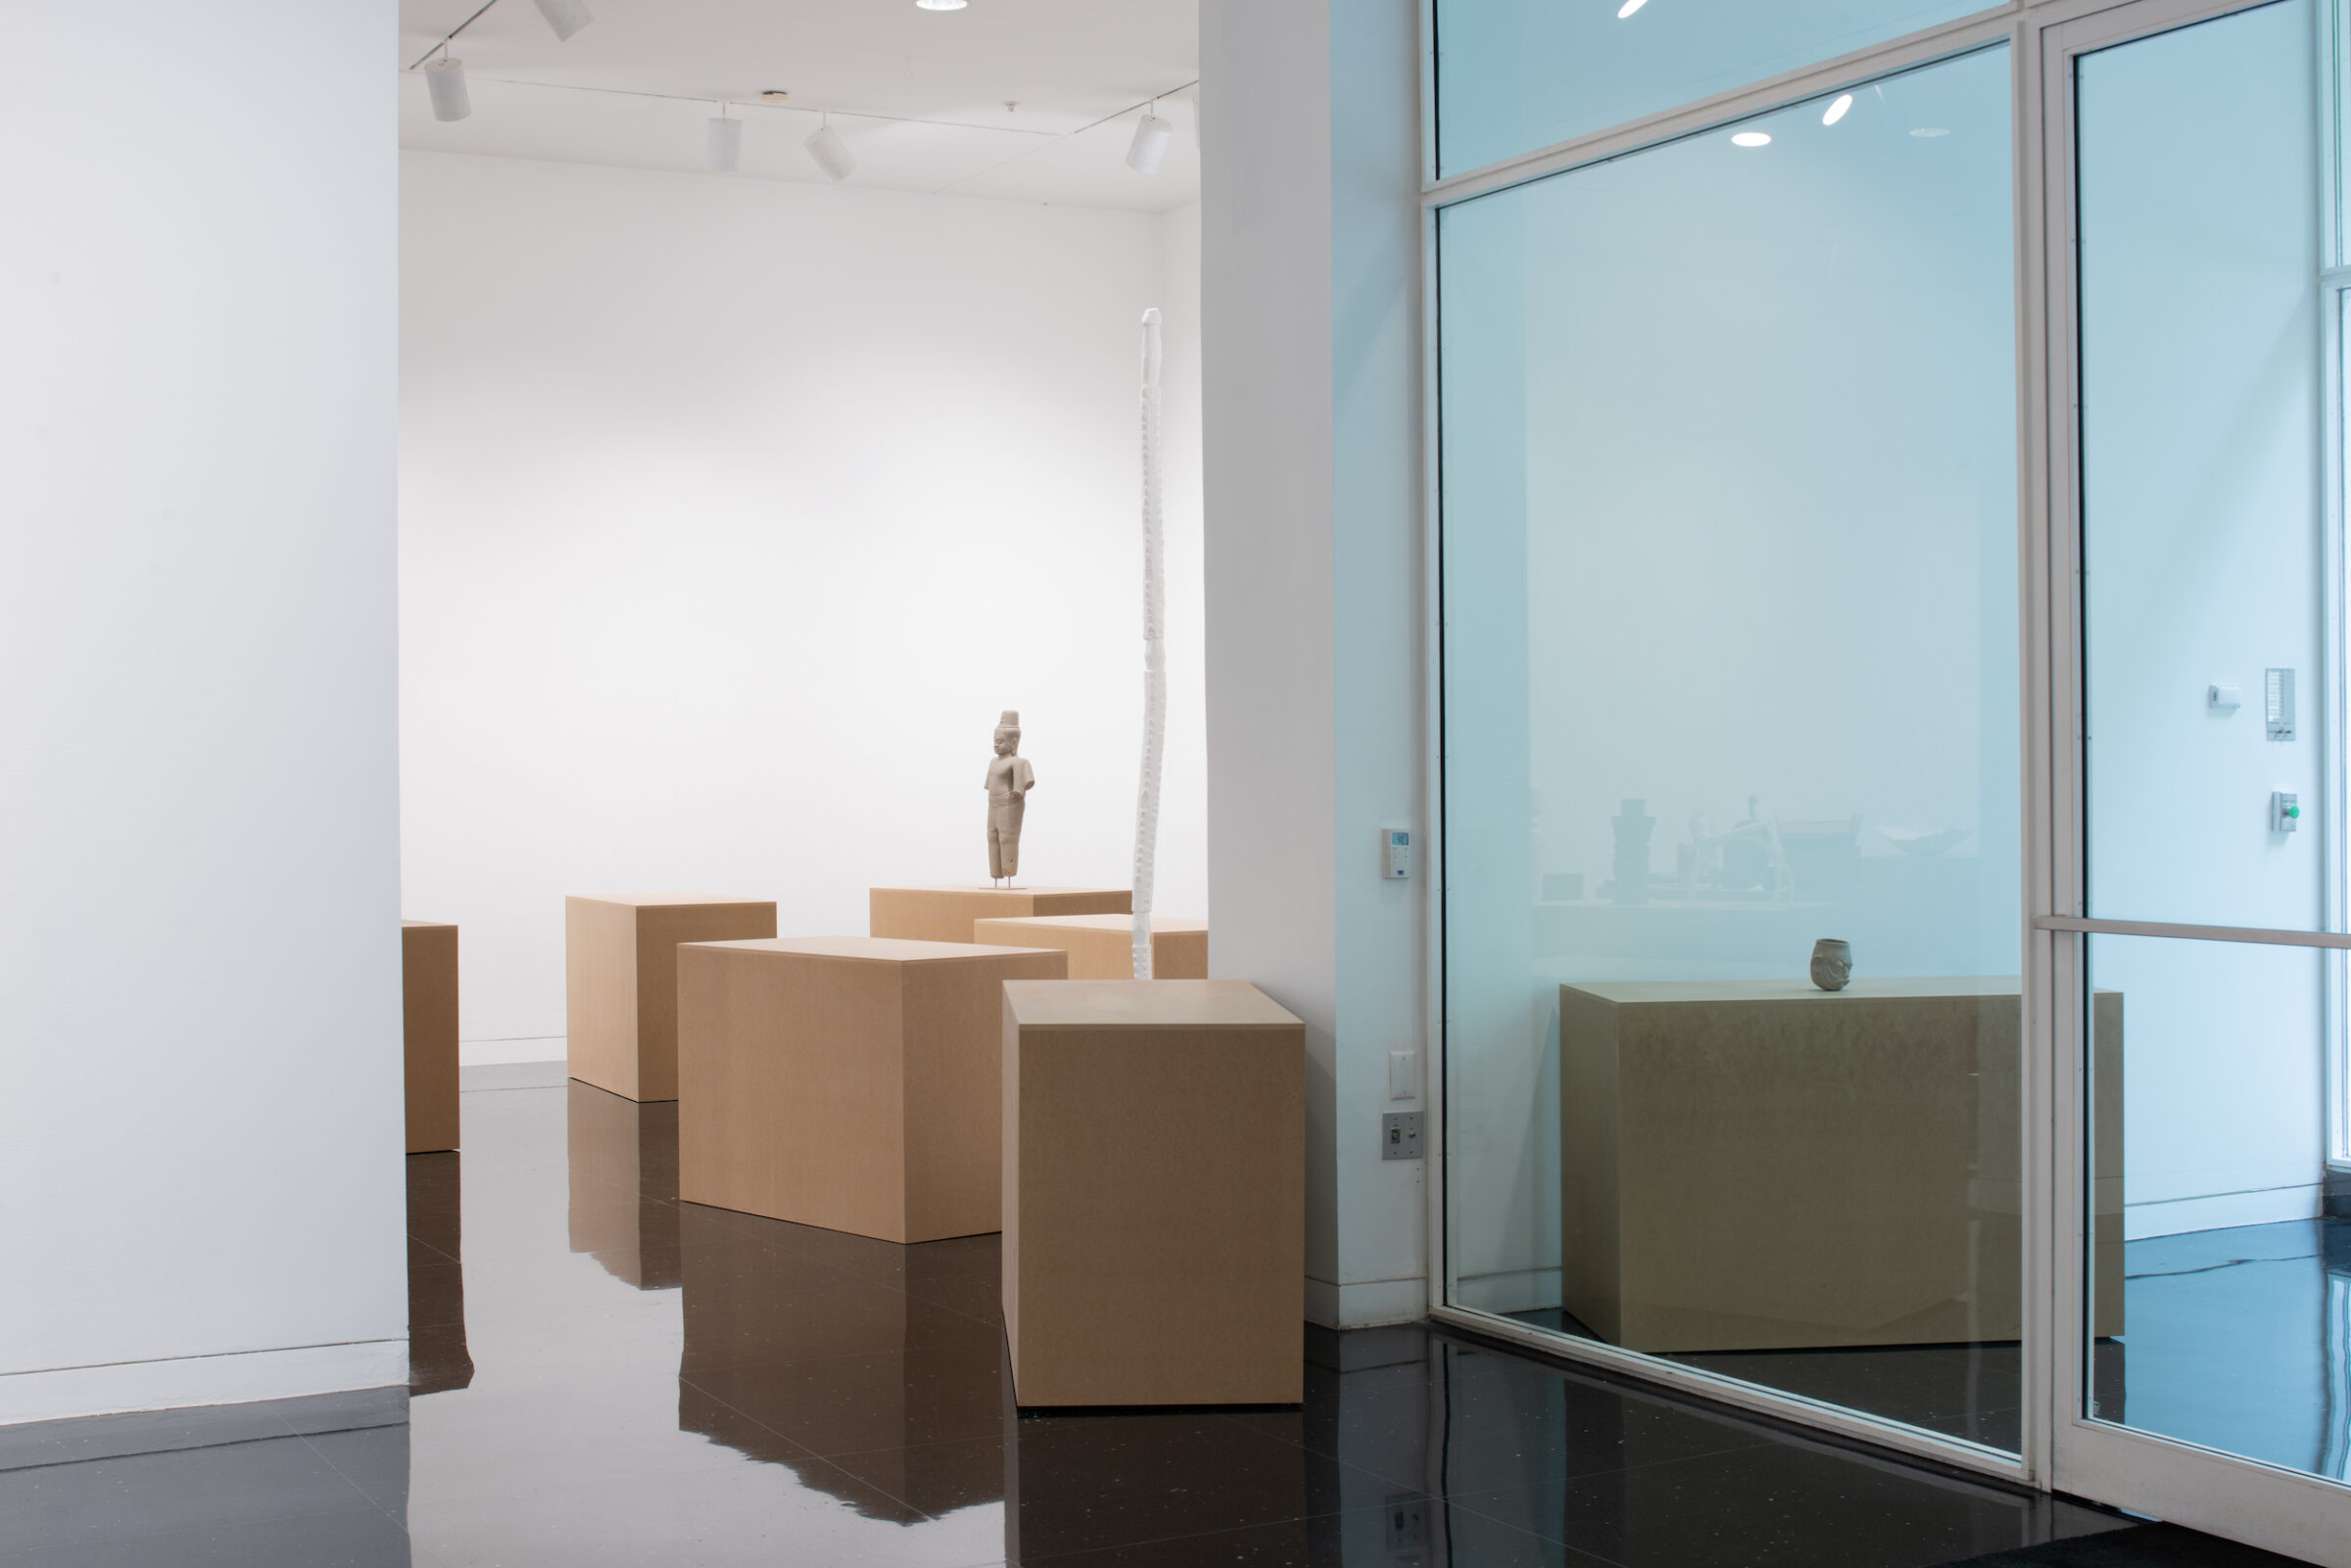 Several pedestals resembling cardboard boxes in a white walled gallery. In the back of the gallery, an armless, gray standing sculpture of a figure stands atop a pedestal.